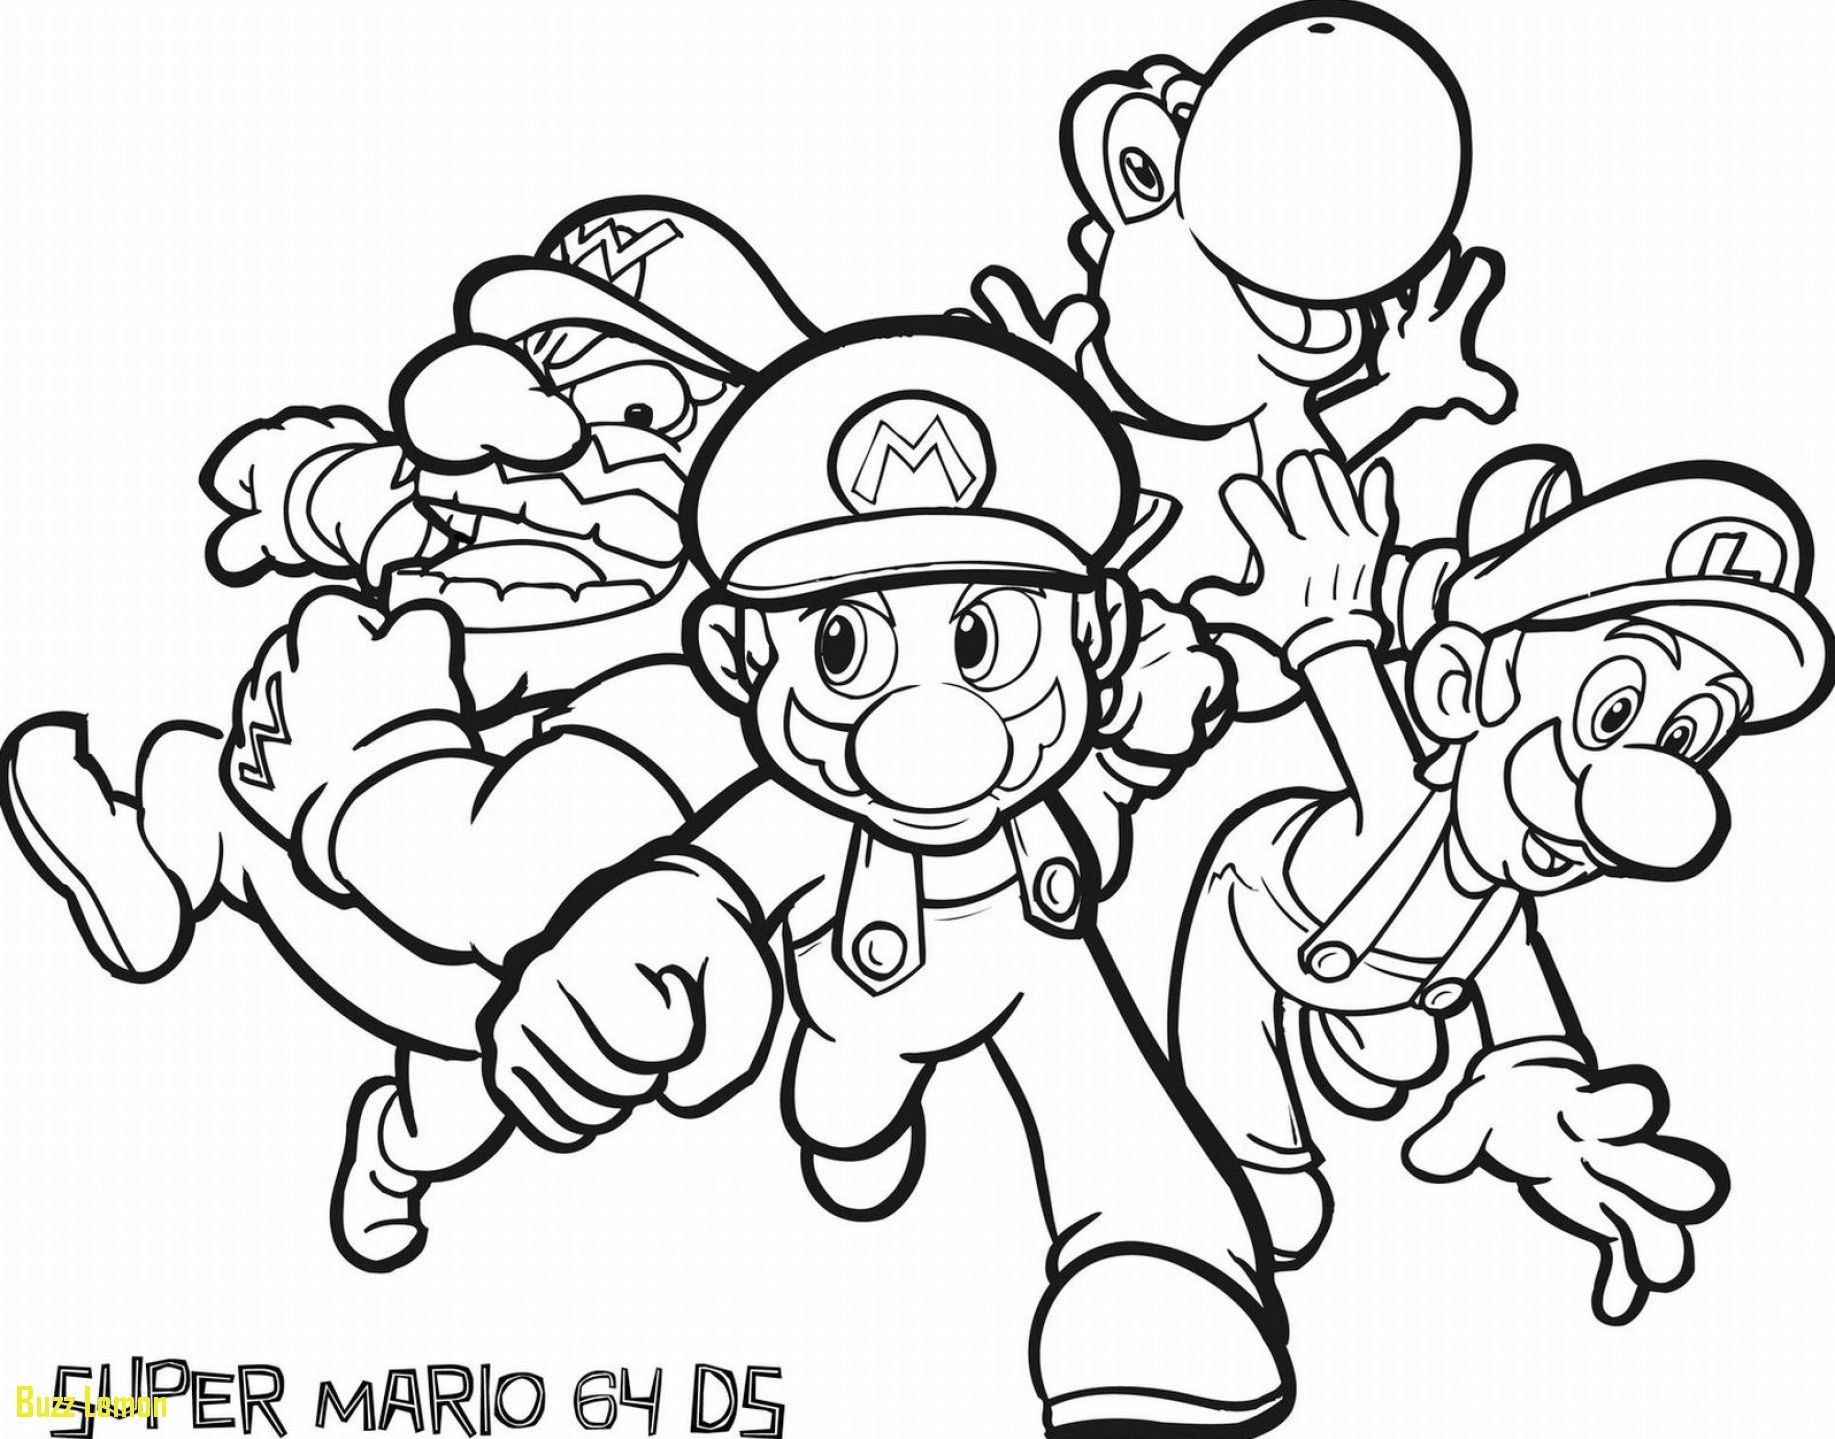 Childrens Printable Coloring Pages at GetDrawings Free download